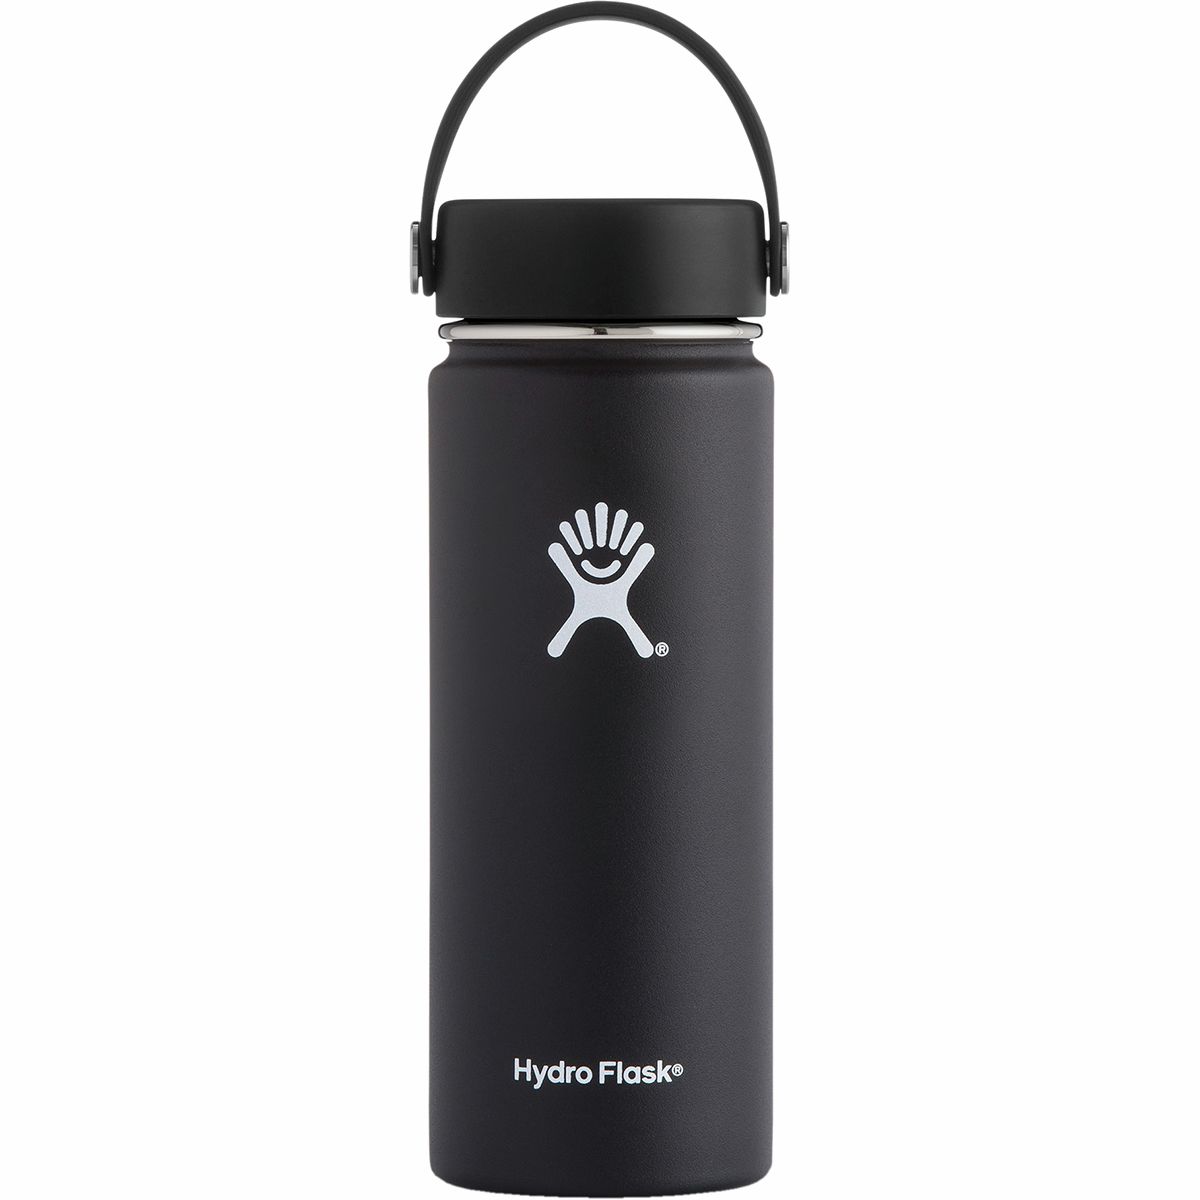 Hydro Flask 18oz Wide Mouth Water Bottle Black, One Size